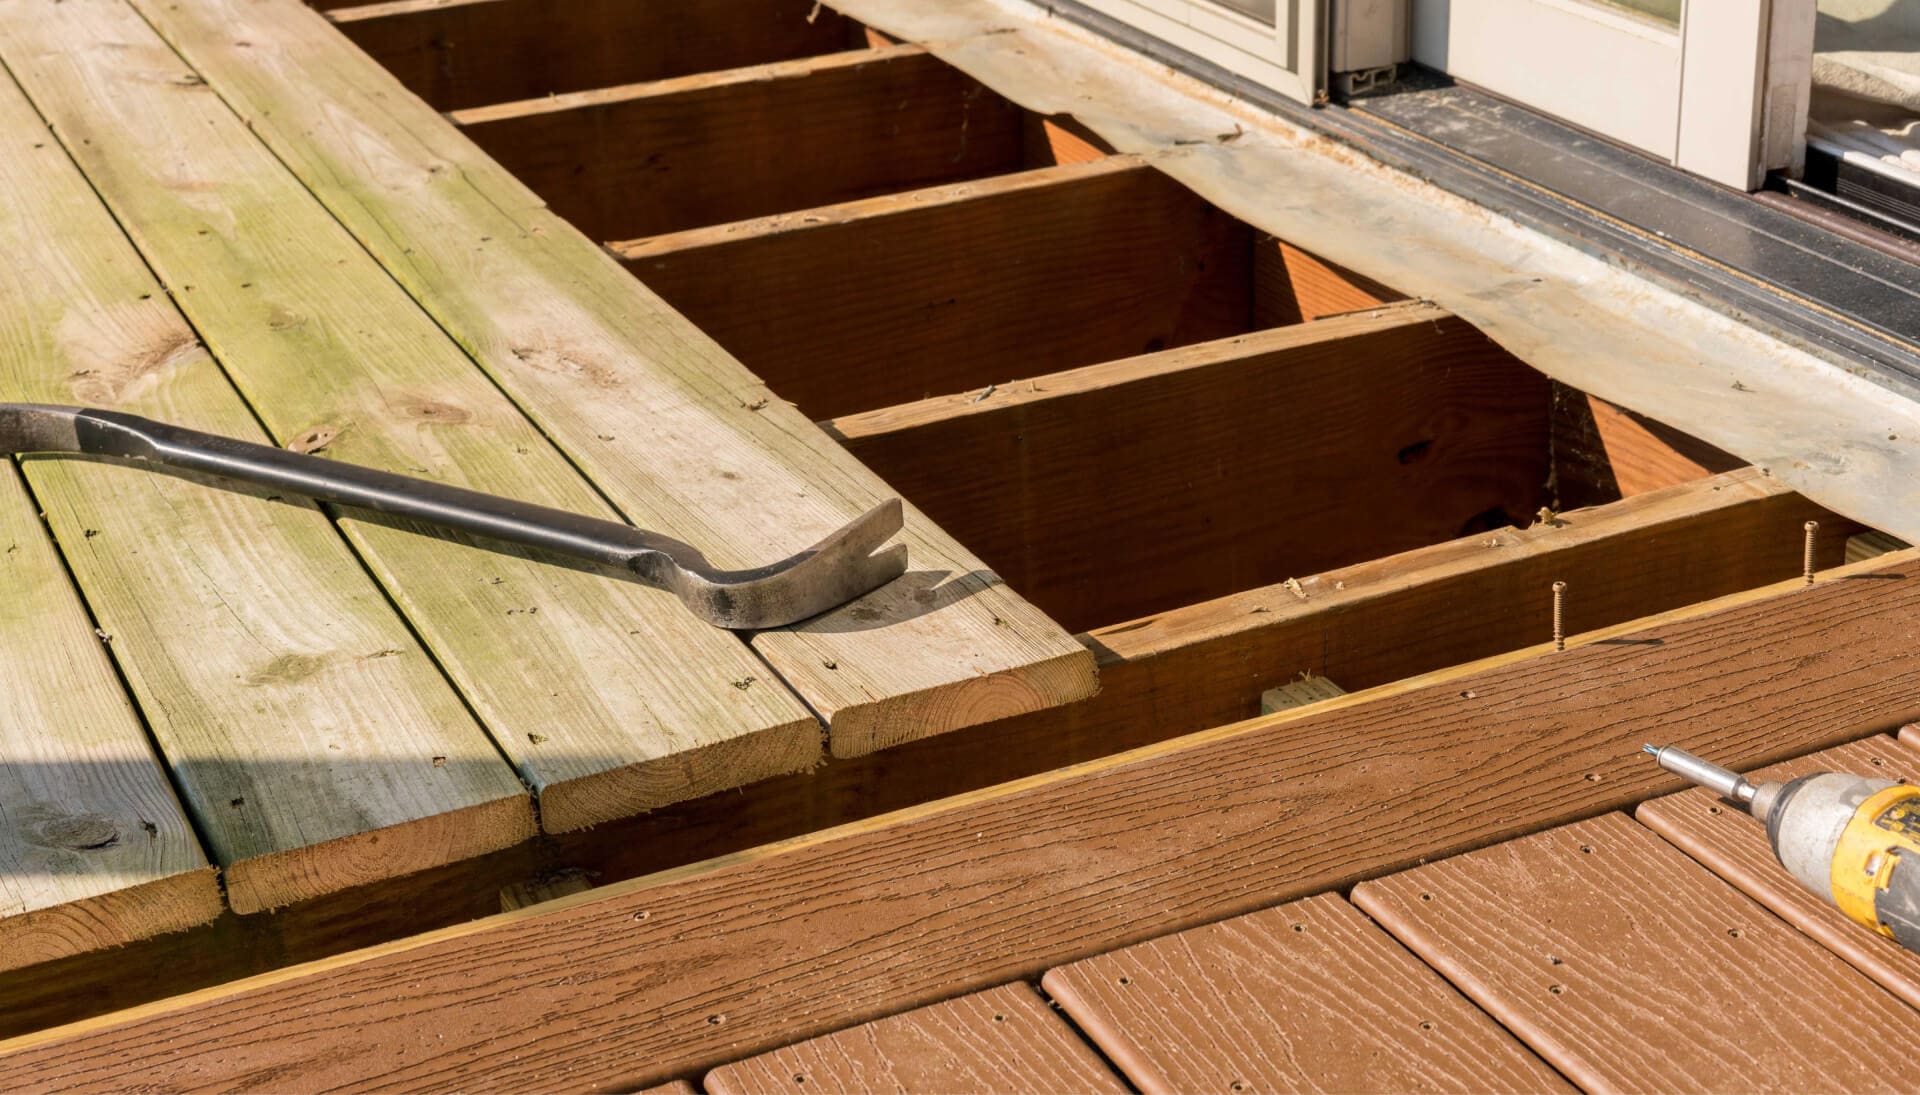 A professional deck repair service in Spartanburg, providing thorough inspections and maintenance to ensure the safety and durability of the structure